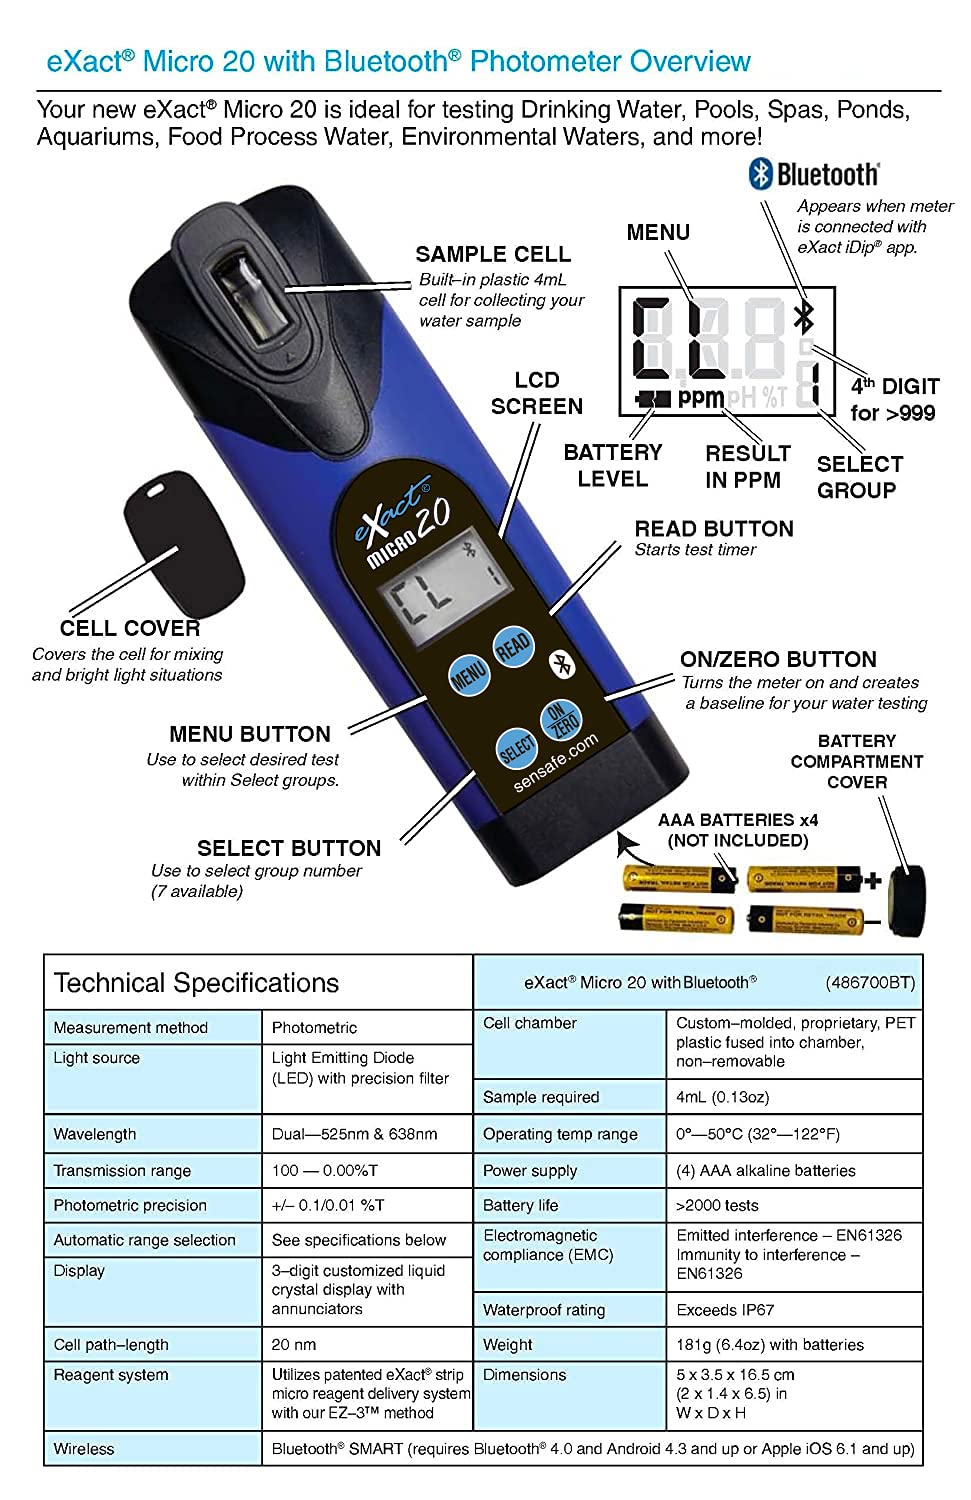 eXact Micro 20 photometer overview